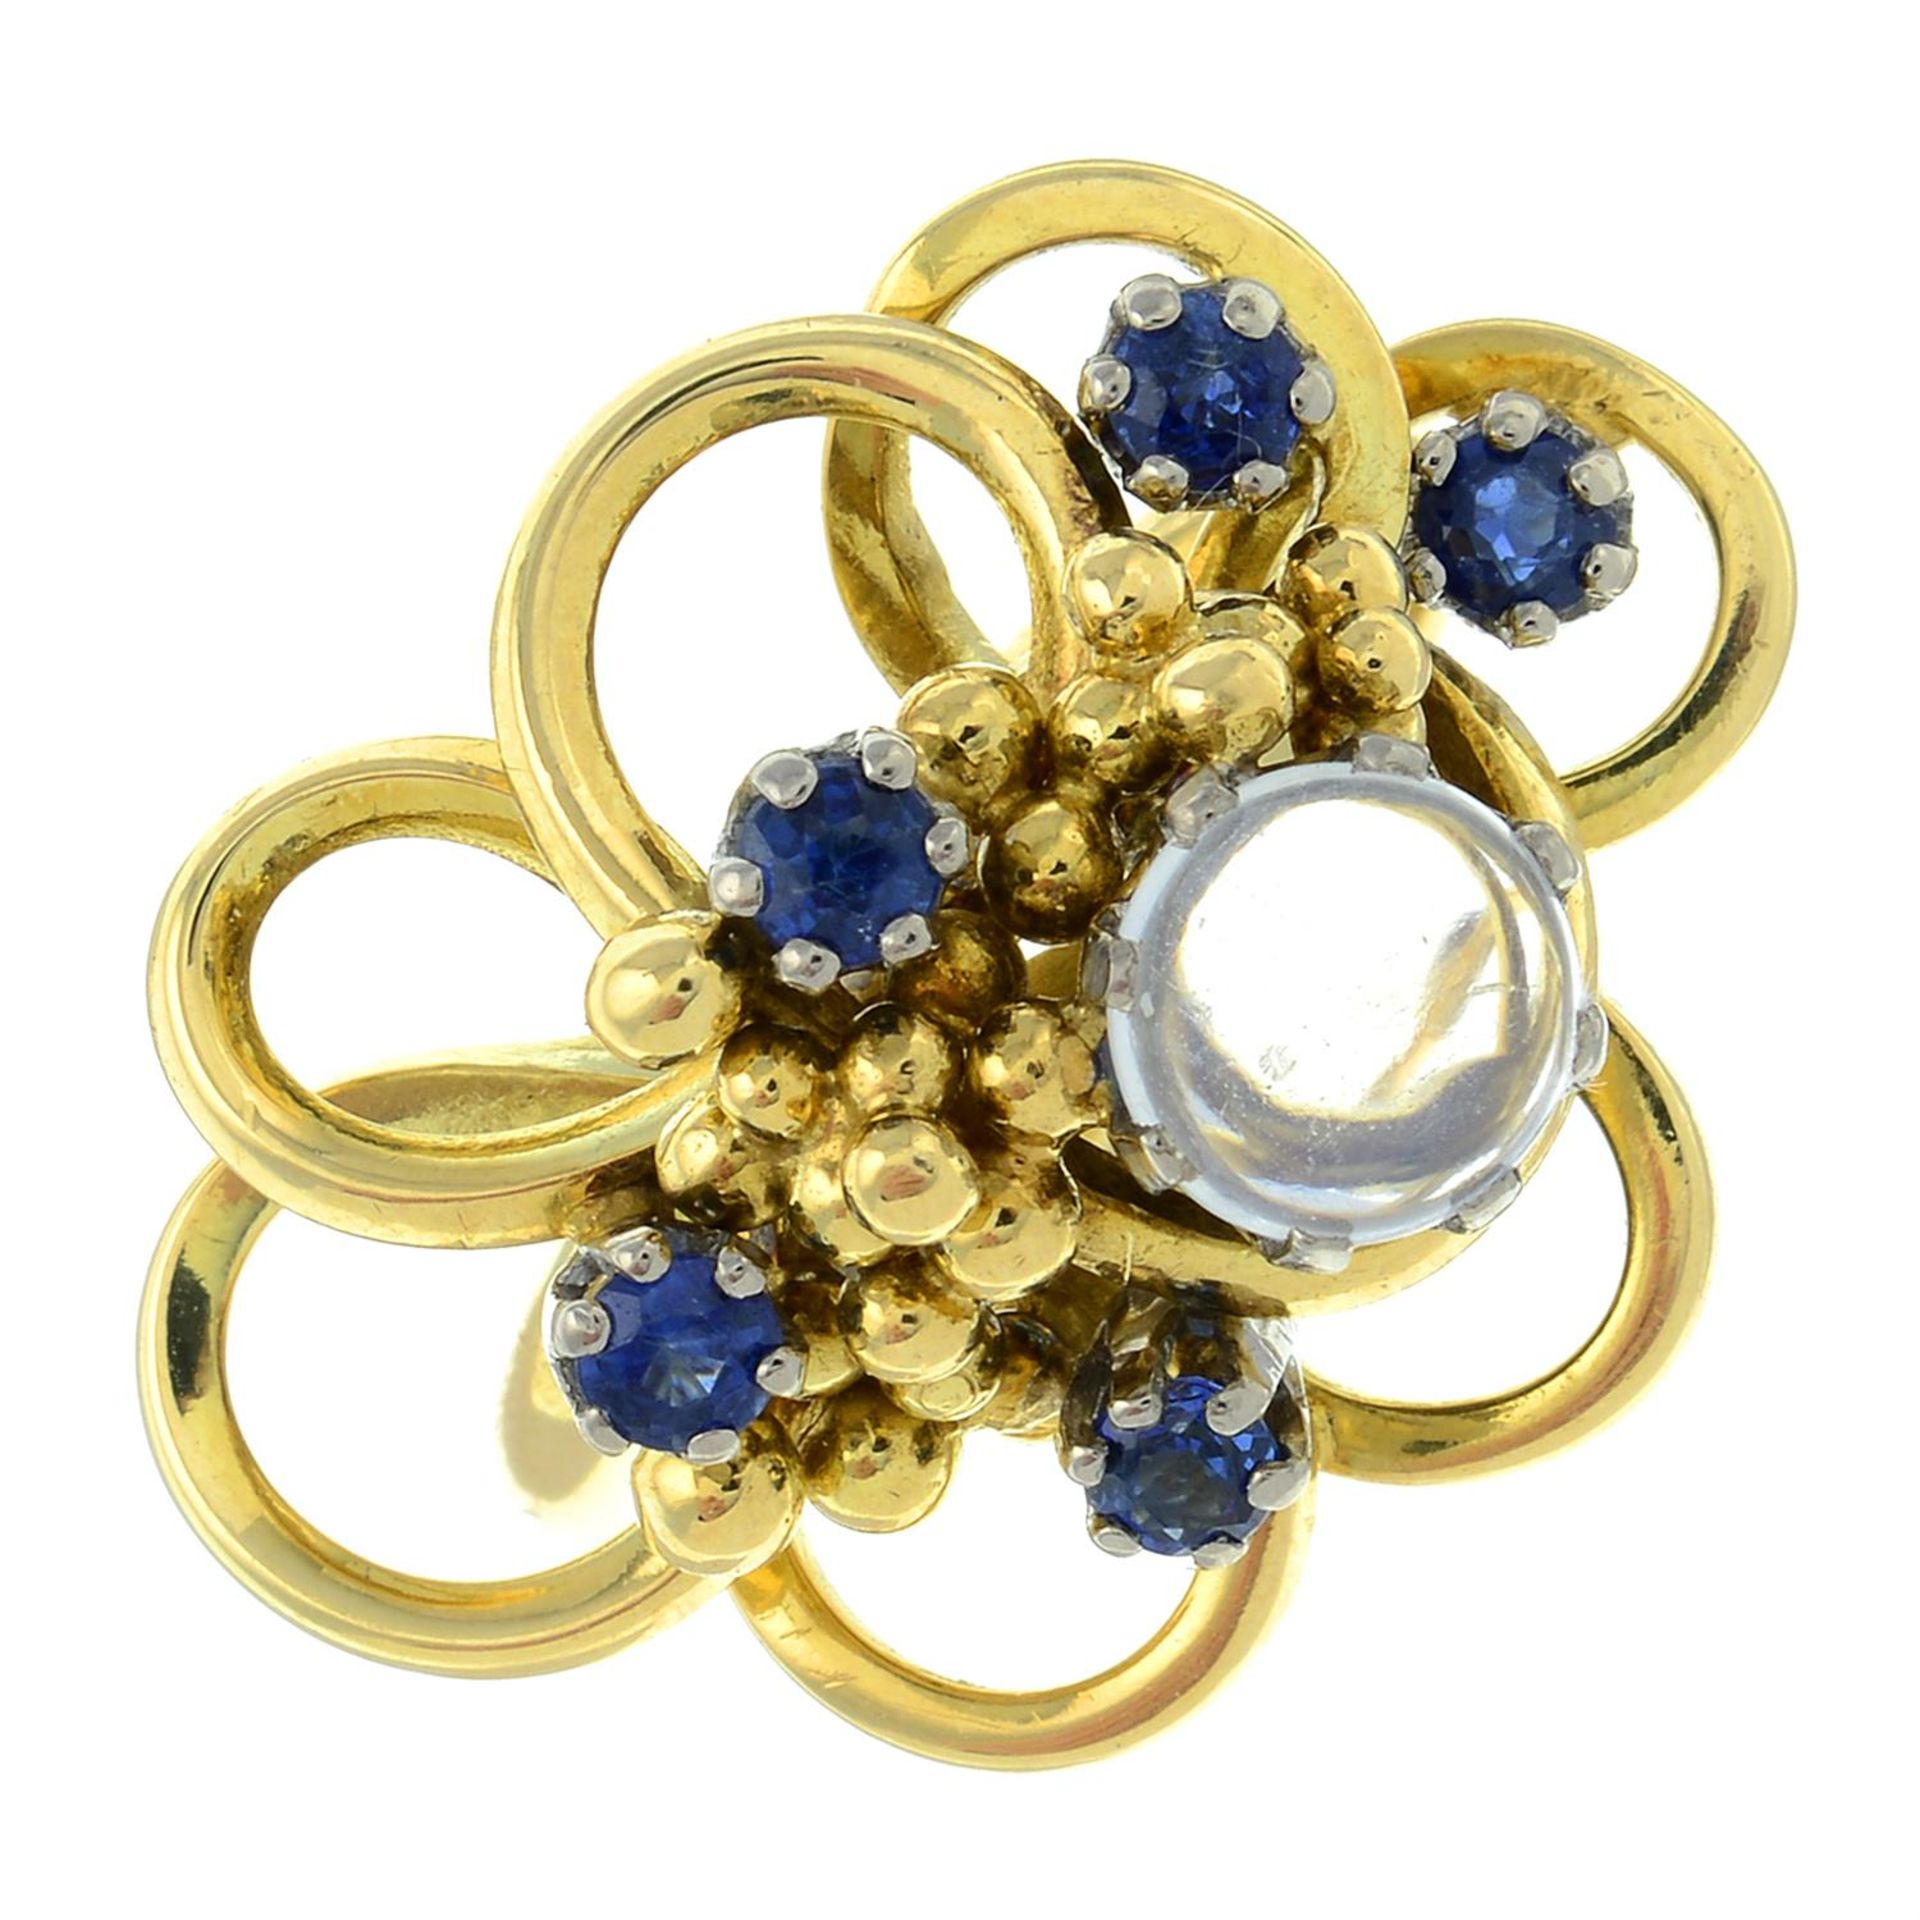 An 18ct gold moonstone and sapphire dress ring.